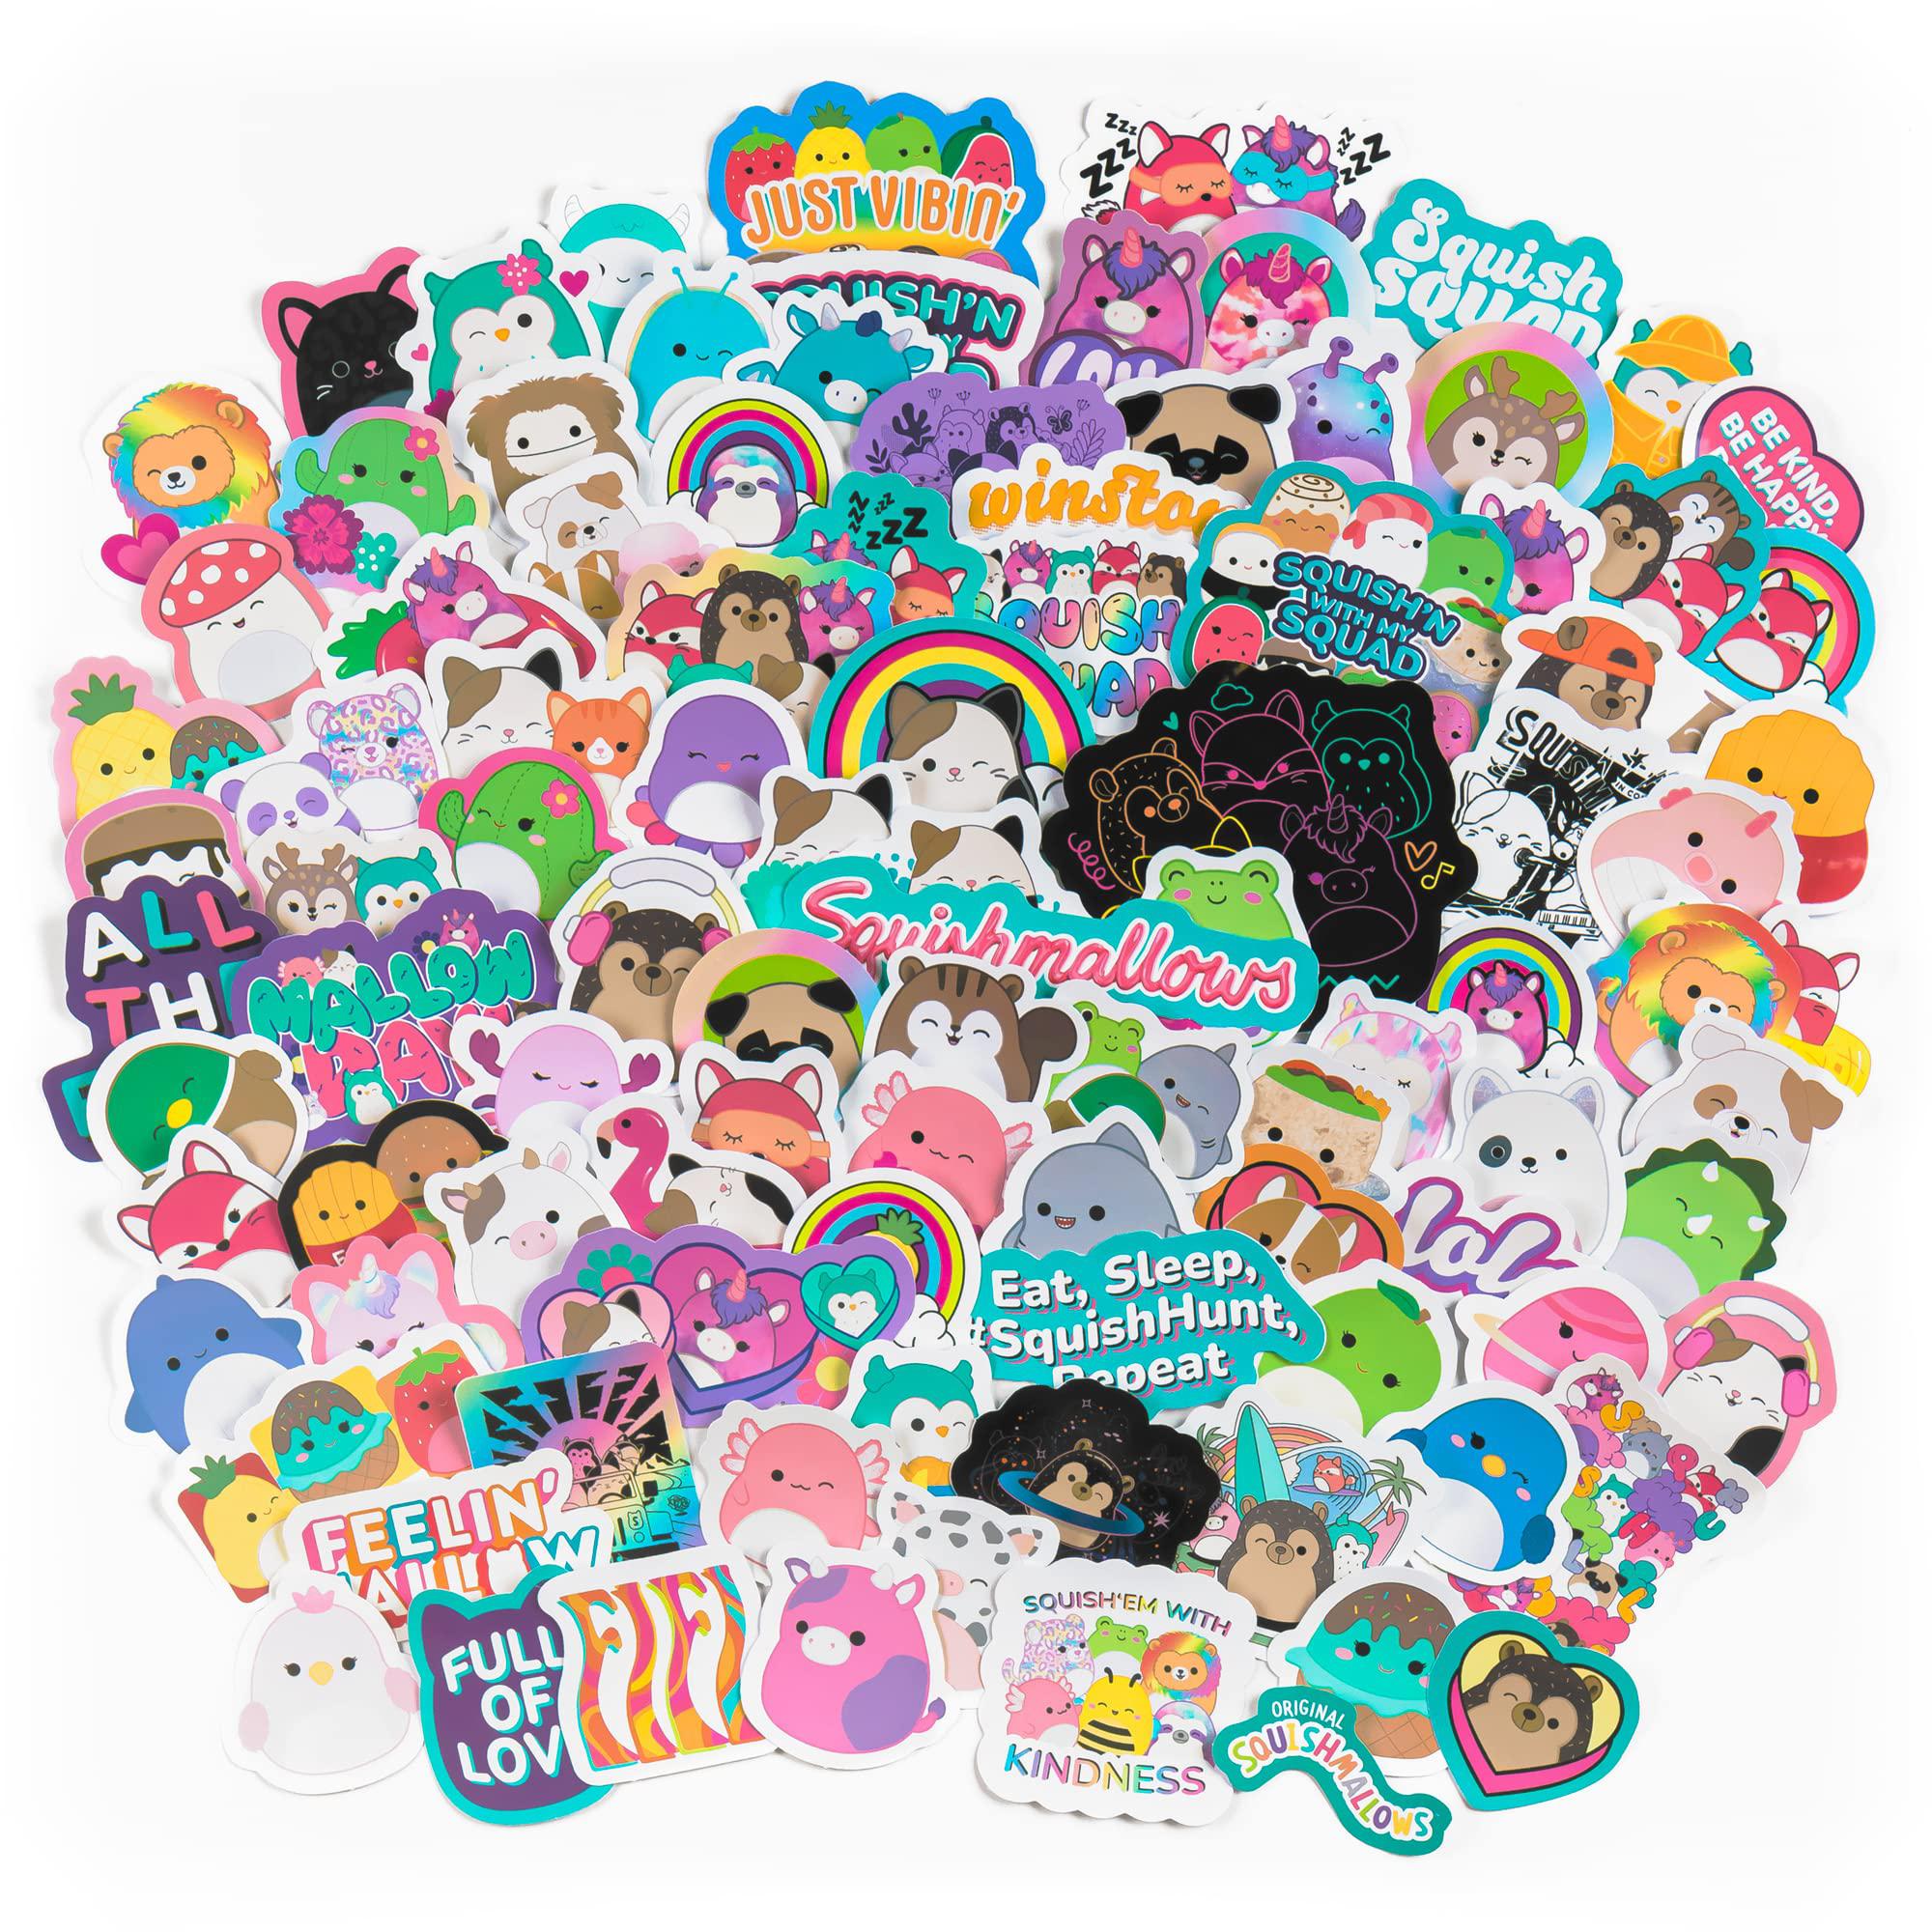 fashion angels squishmallows vinyl sticker pack - includes 100 large squishmallows stickers - water resistant stickers - join